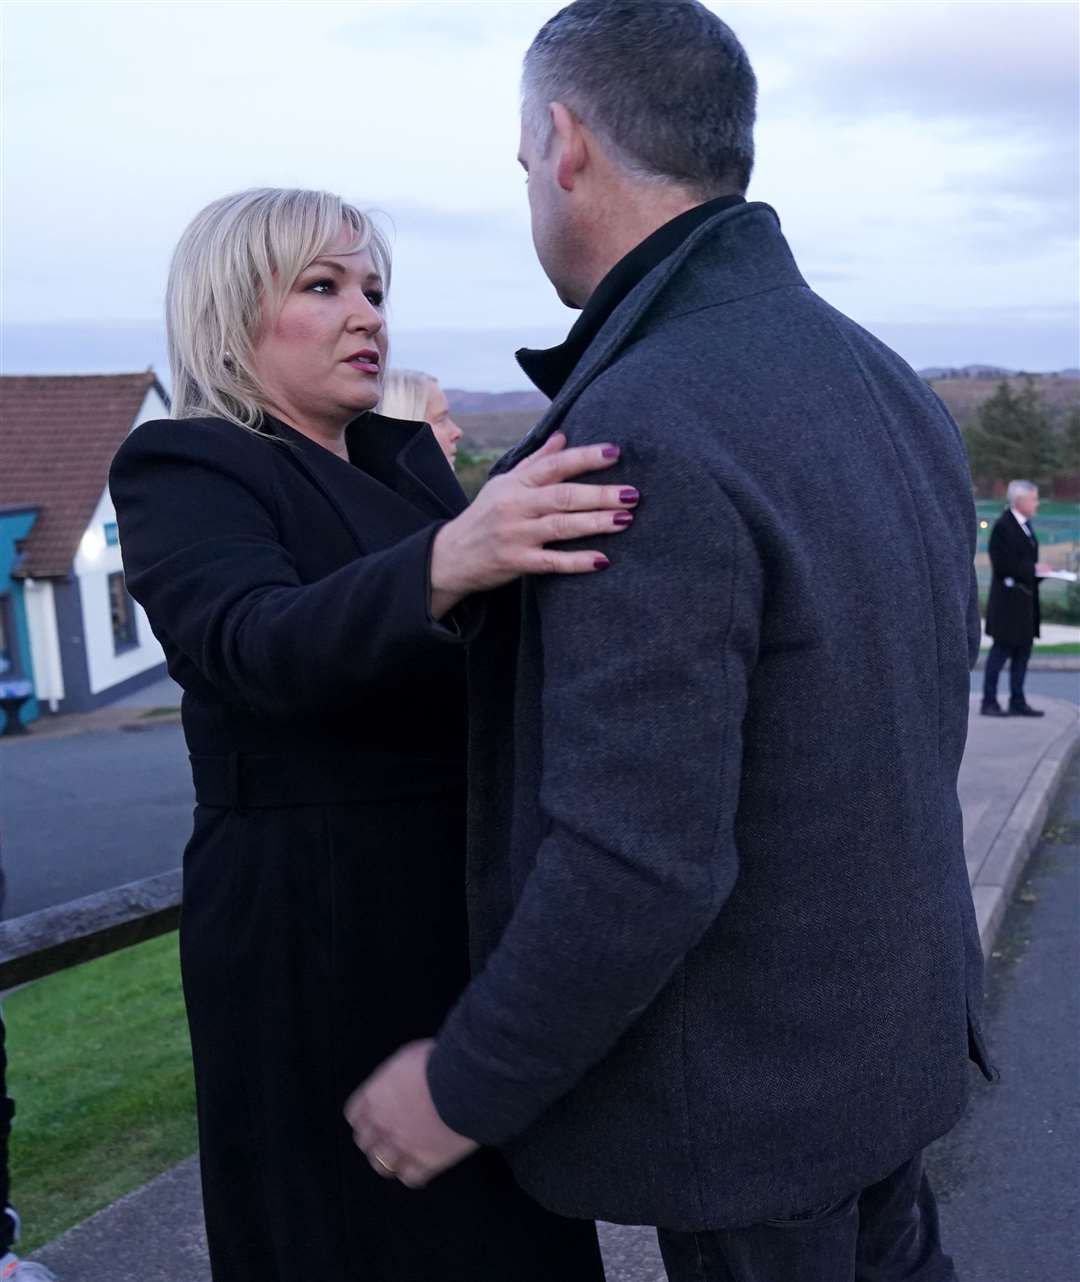 Sinn Fein deputy leader Michelle O’Neill with Sinn Fein TD for Donegal South West, Pearse Doherty, at the scene of the explosion (Brian Lawless/PA)